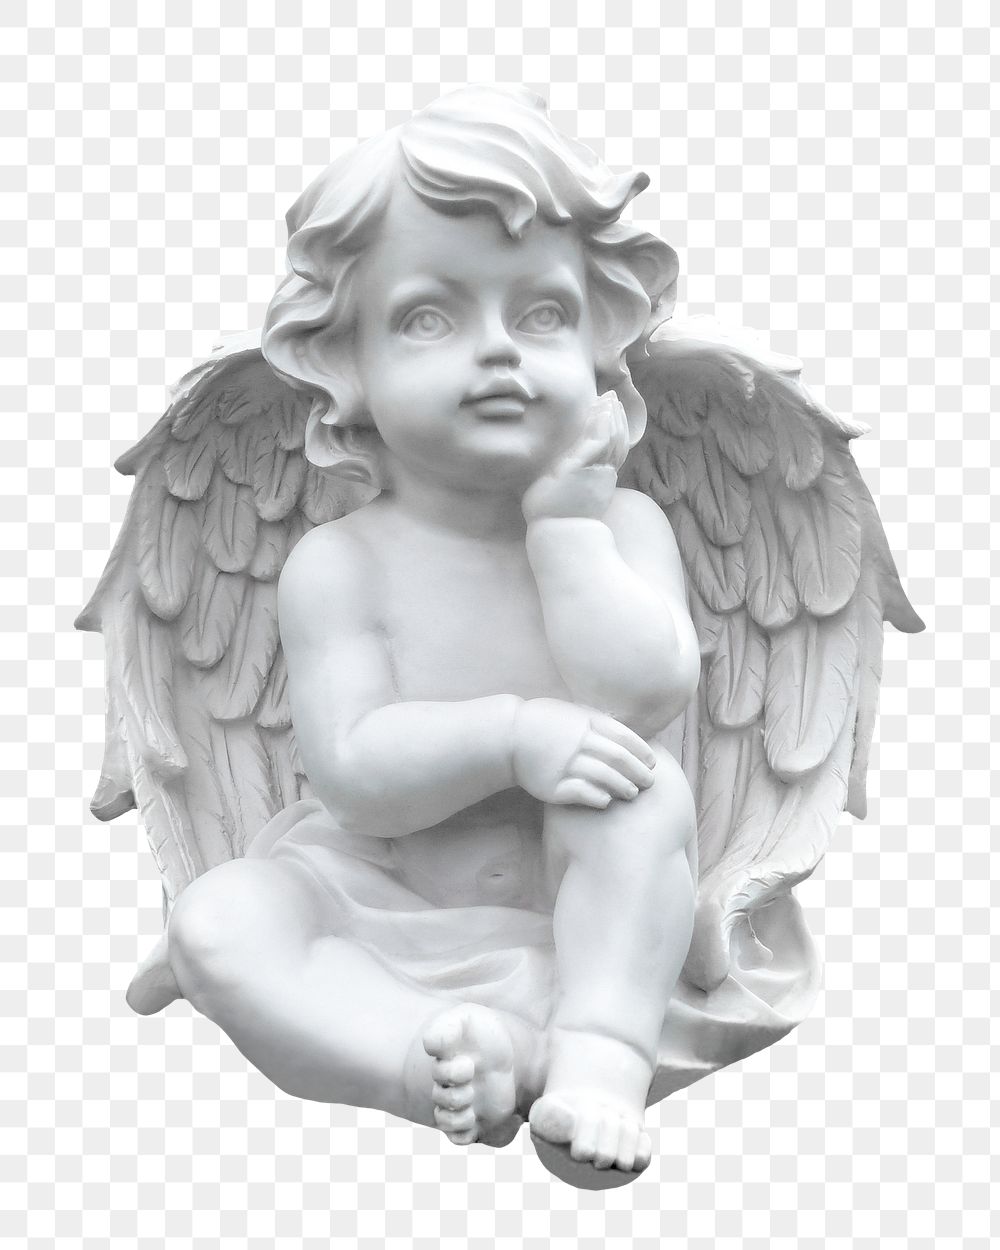 Baby angel statue png sticker, transparent background